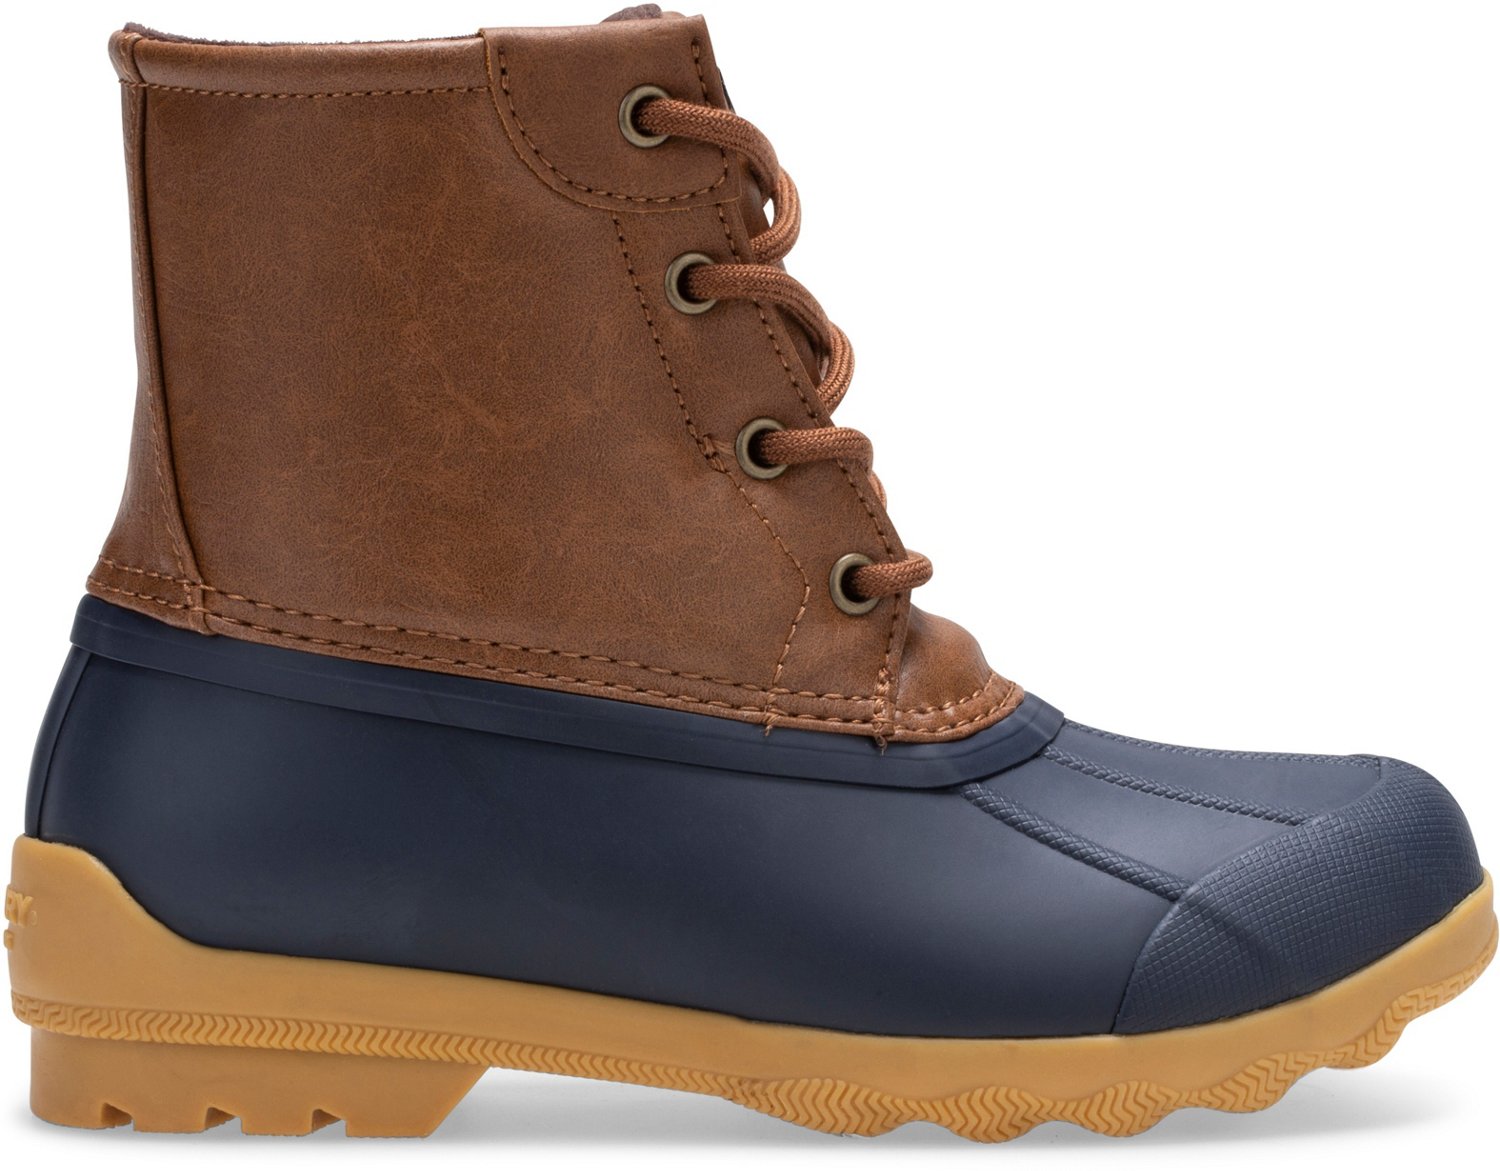 Sperry Kids Port Duck Boots | Free Shipping at Academy